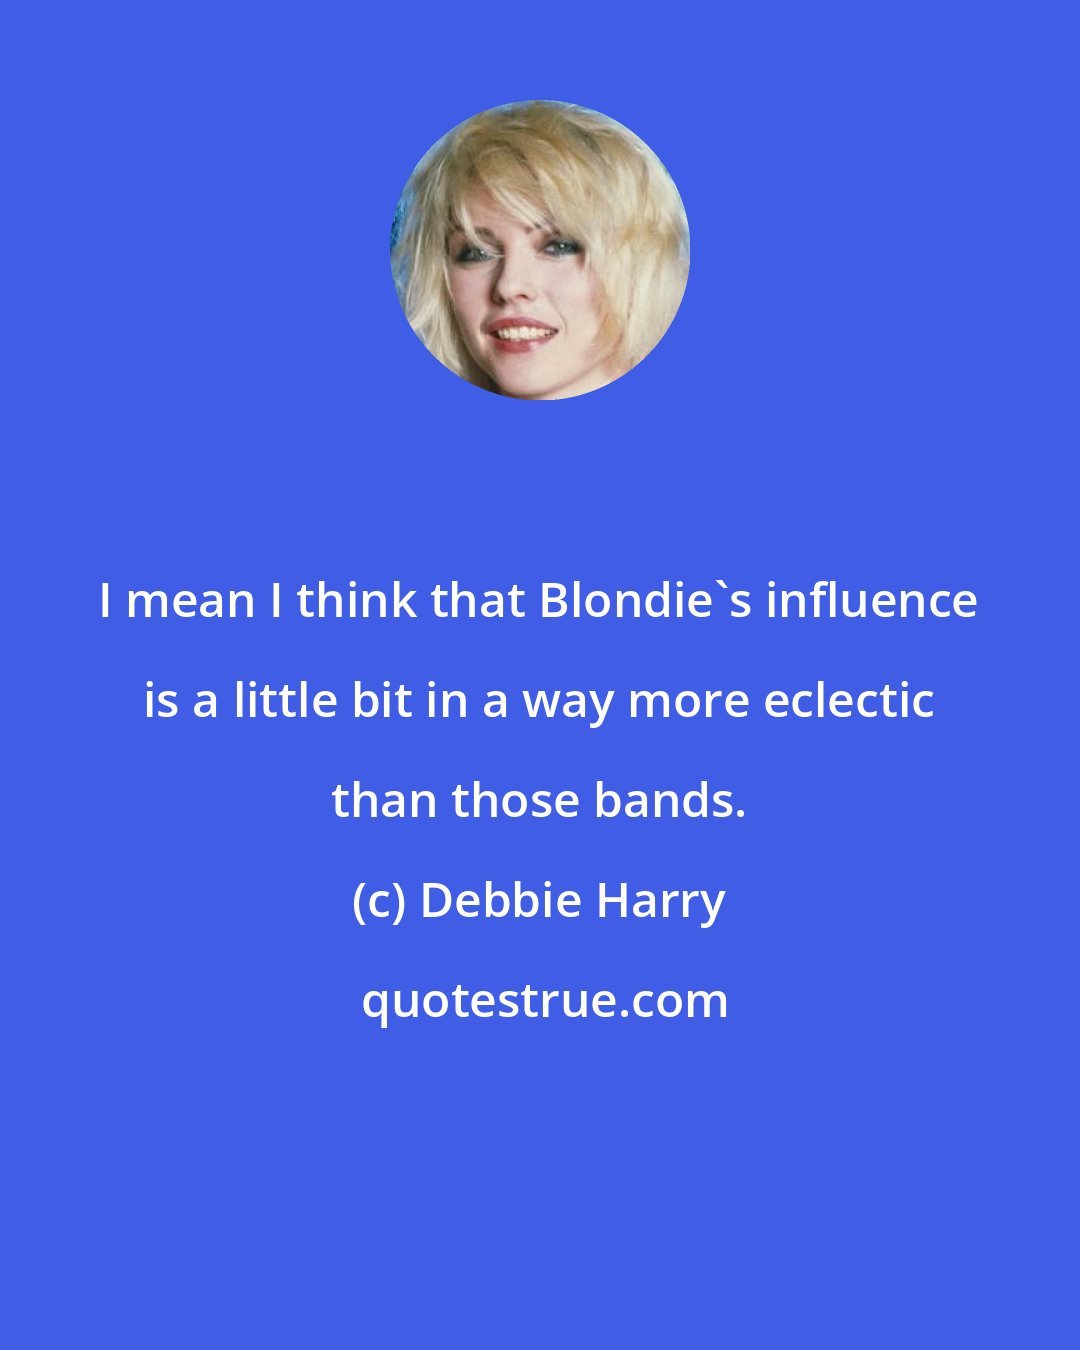 Debbie Harry: I mean I think that Blondie's influence is a little bit in a way more eclectic than those bands.